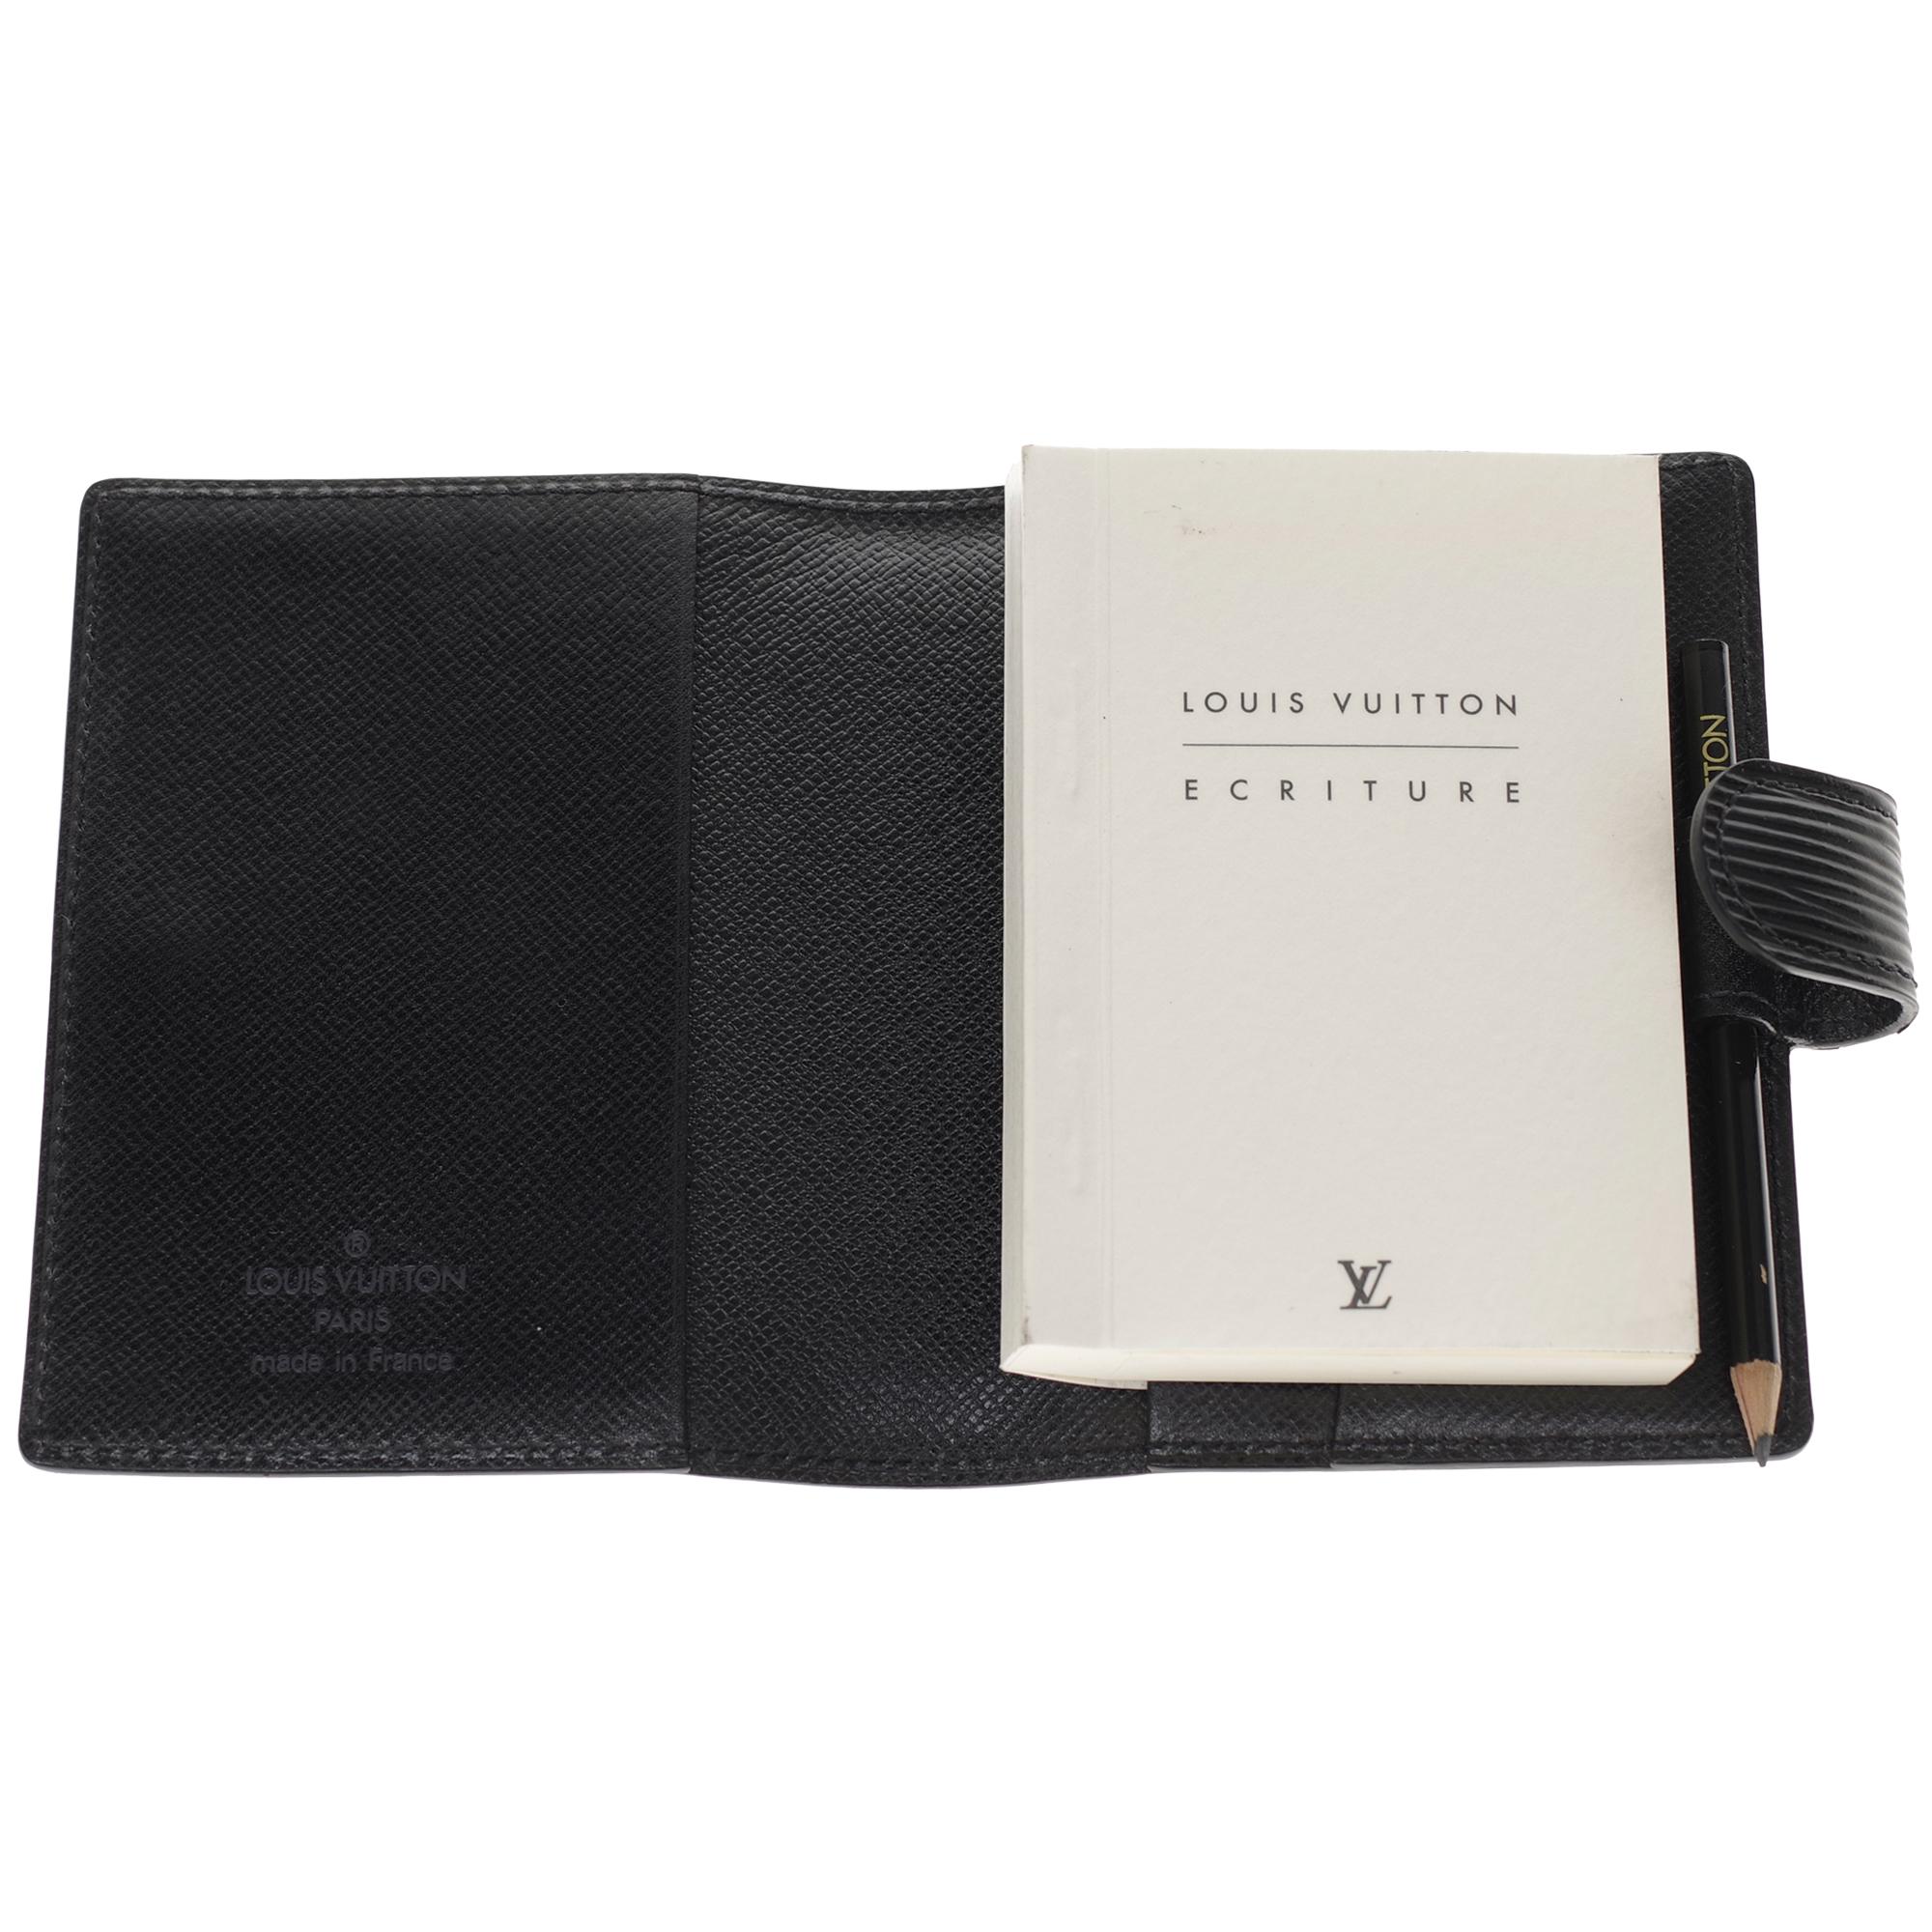 Women's or Men's Louis Vuitton notebook in black epi leather with paper block and paper pencil